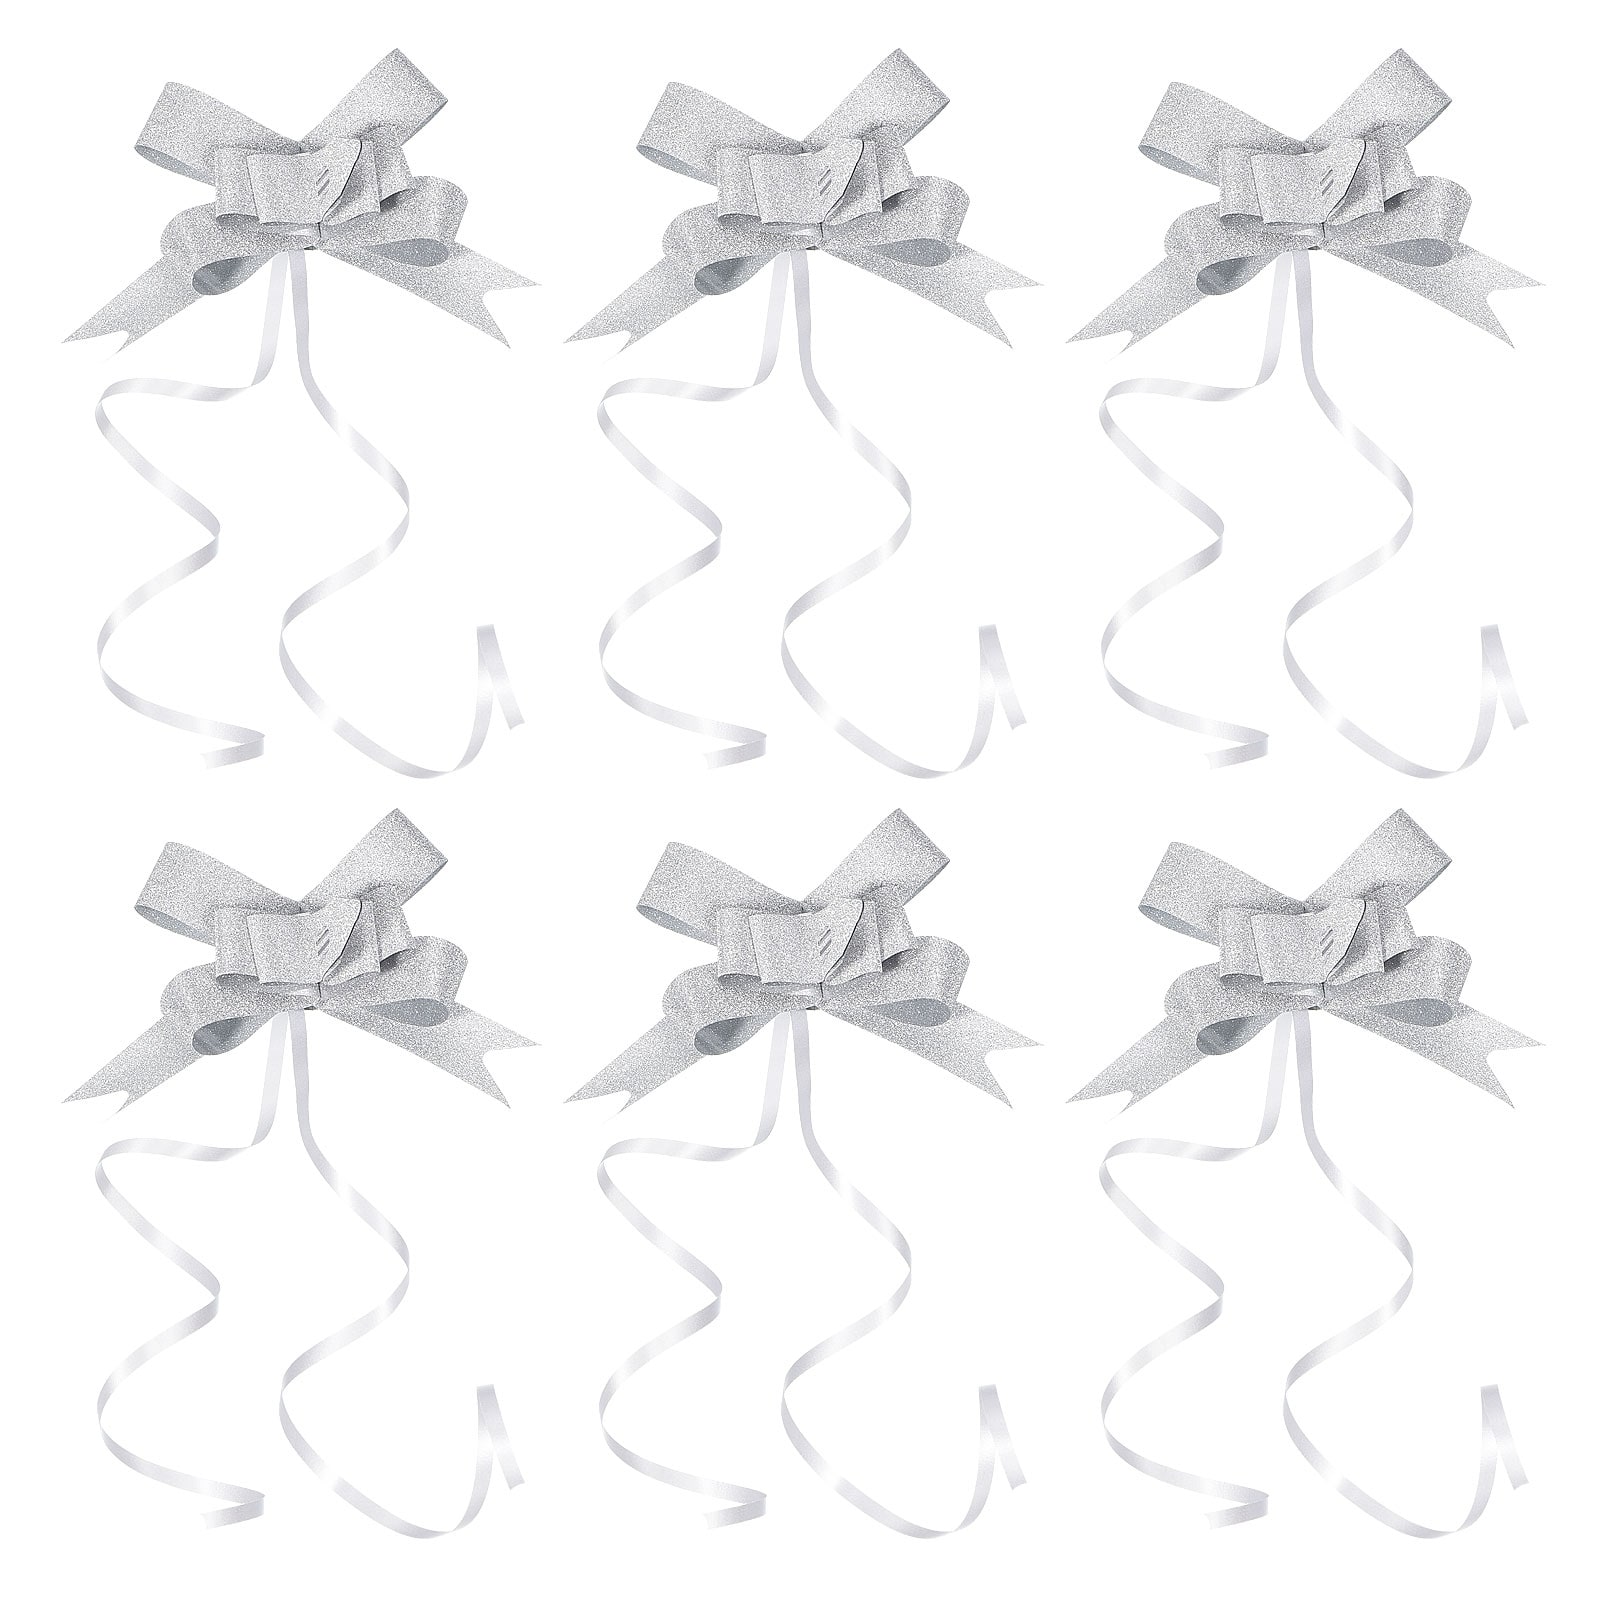 https://ak1.ostkcdn.com/images/products/is/images/direct/14dc900d869f776721448ec9ba2f6e4adefc4c6e/40Pcs-2%22-Pull-Bows-Ribbon-Present-Wrapping-String-Decorative-Bow-Tie.jpg